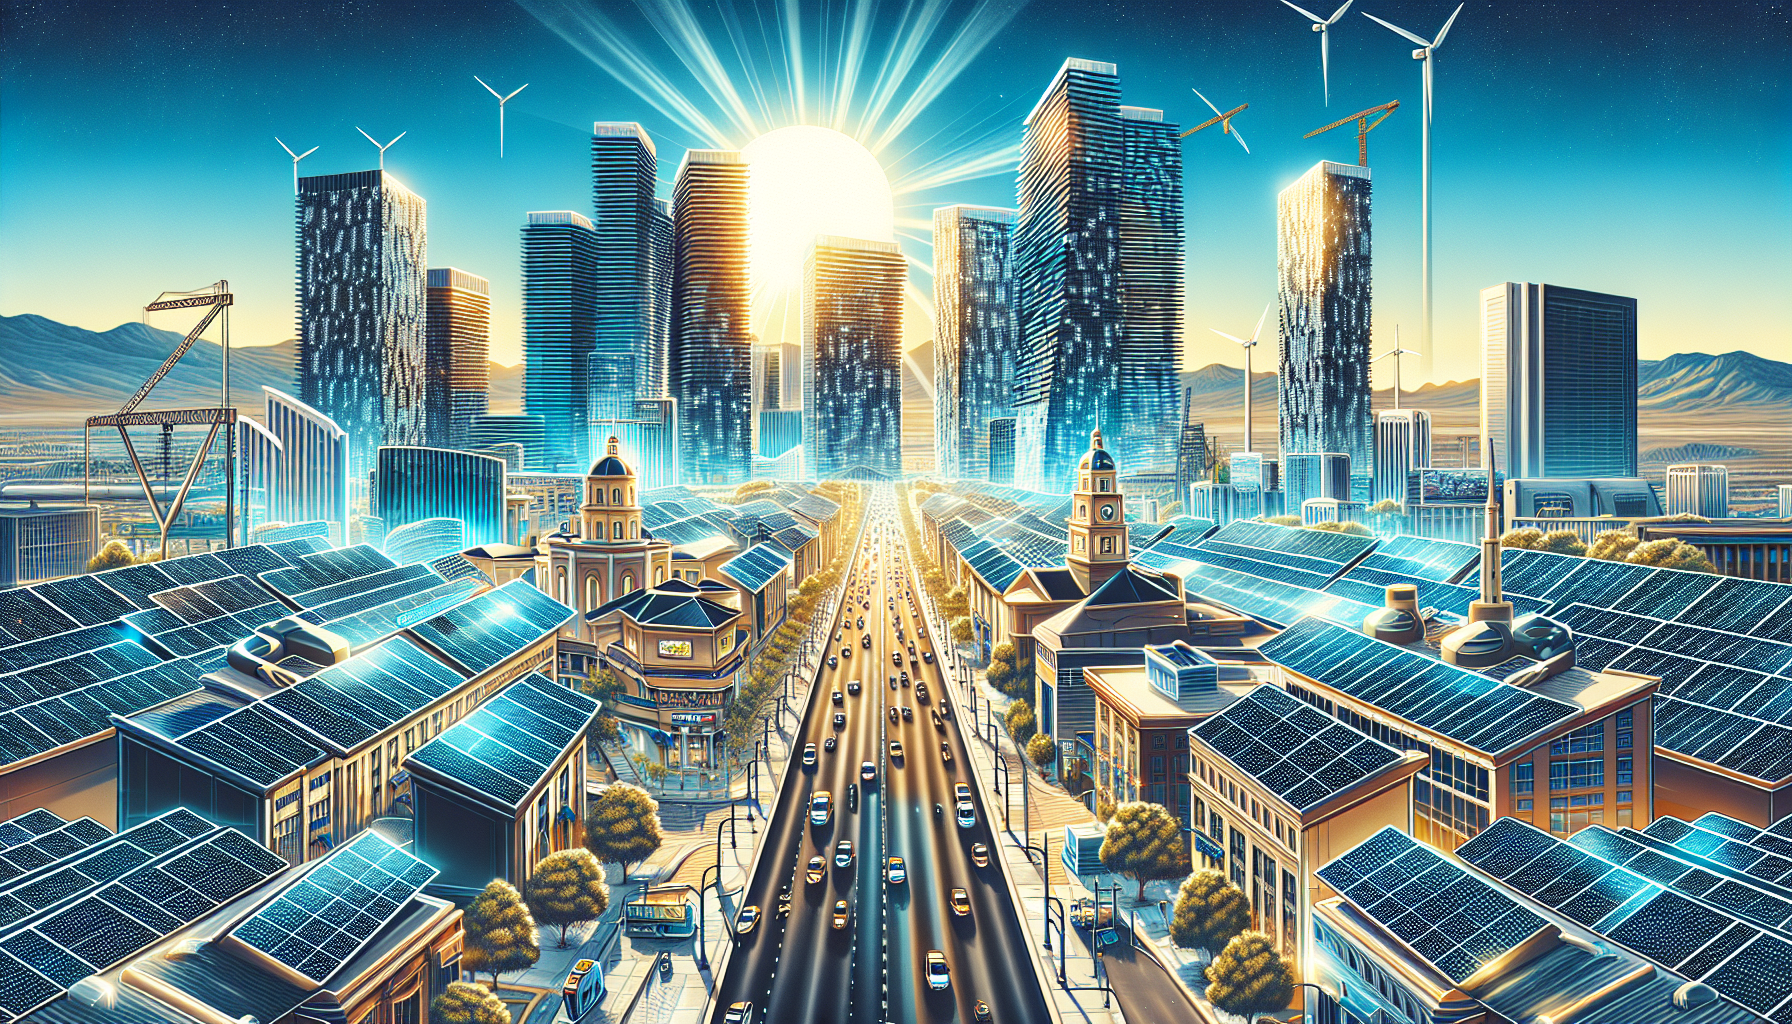 Illustration of bustling city with solar panels on rooftops